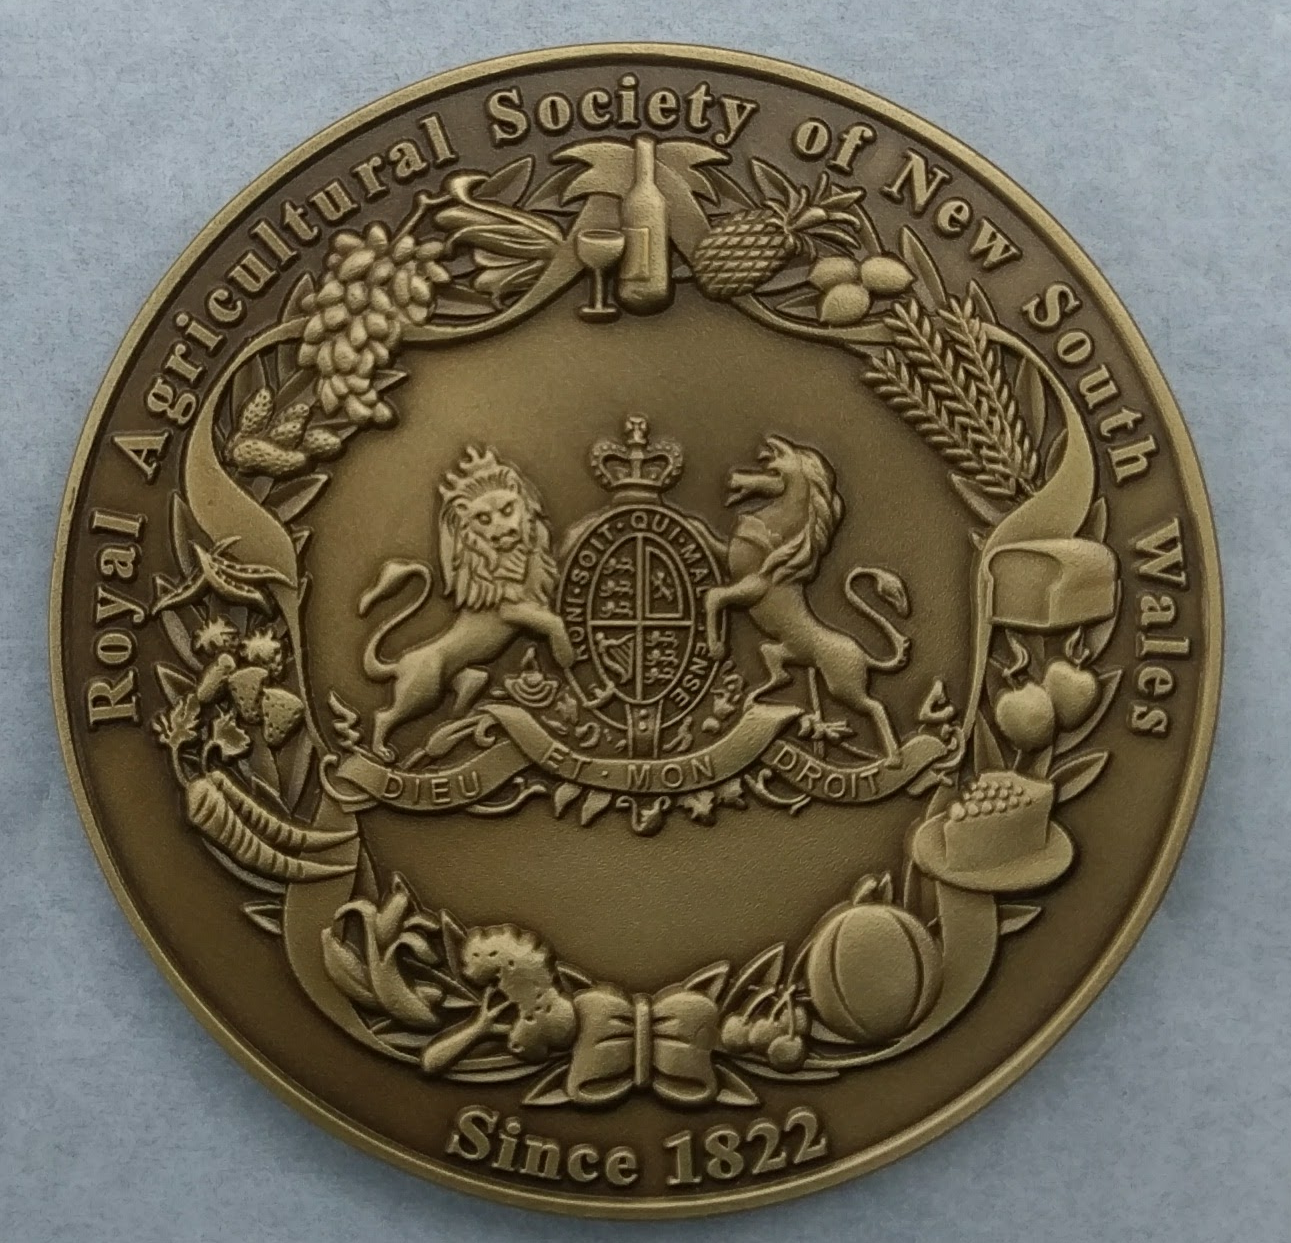 Sydney Royal Medal of Excellence Reverse